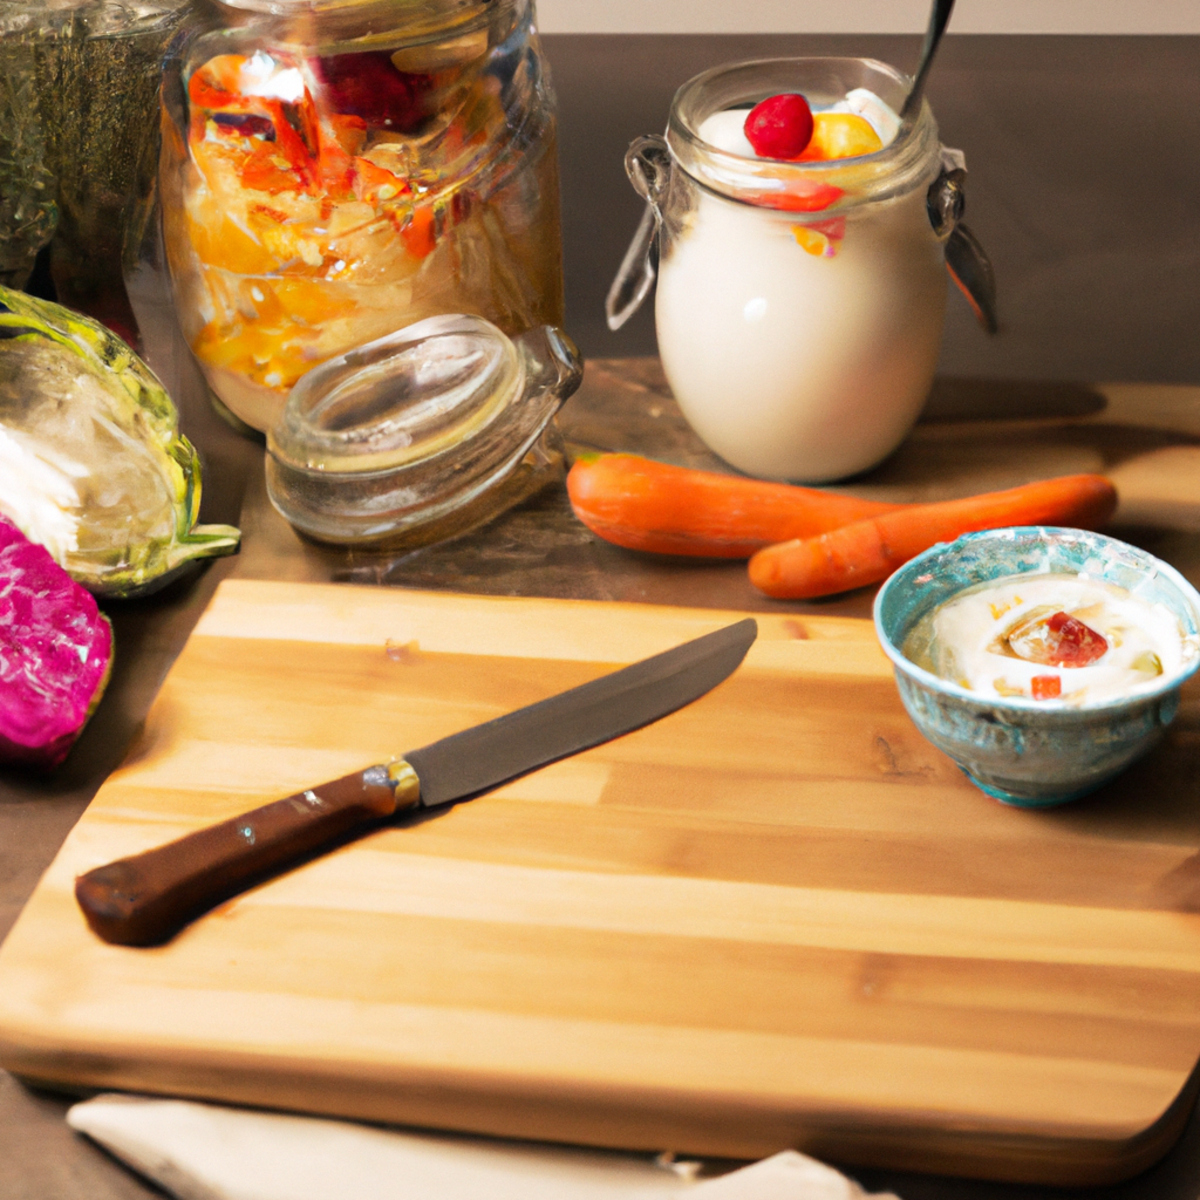 The photo depicts a wooden cutting board with a variety of colorful fruits and vegetables arranged in a visually appealing manner. In the foreground, there is a glass jar filled with homemade yogurt, and next to it, a small dish of sauerkraut. The background shows a few kitchen utensils, including a knife and a wooden spoon. The overall composition of the photo suggests a focus on healthy eating and the importance of incorporating probiotics into one's daily routine for optimal gut health.